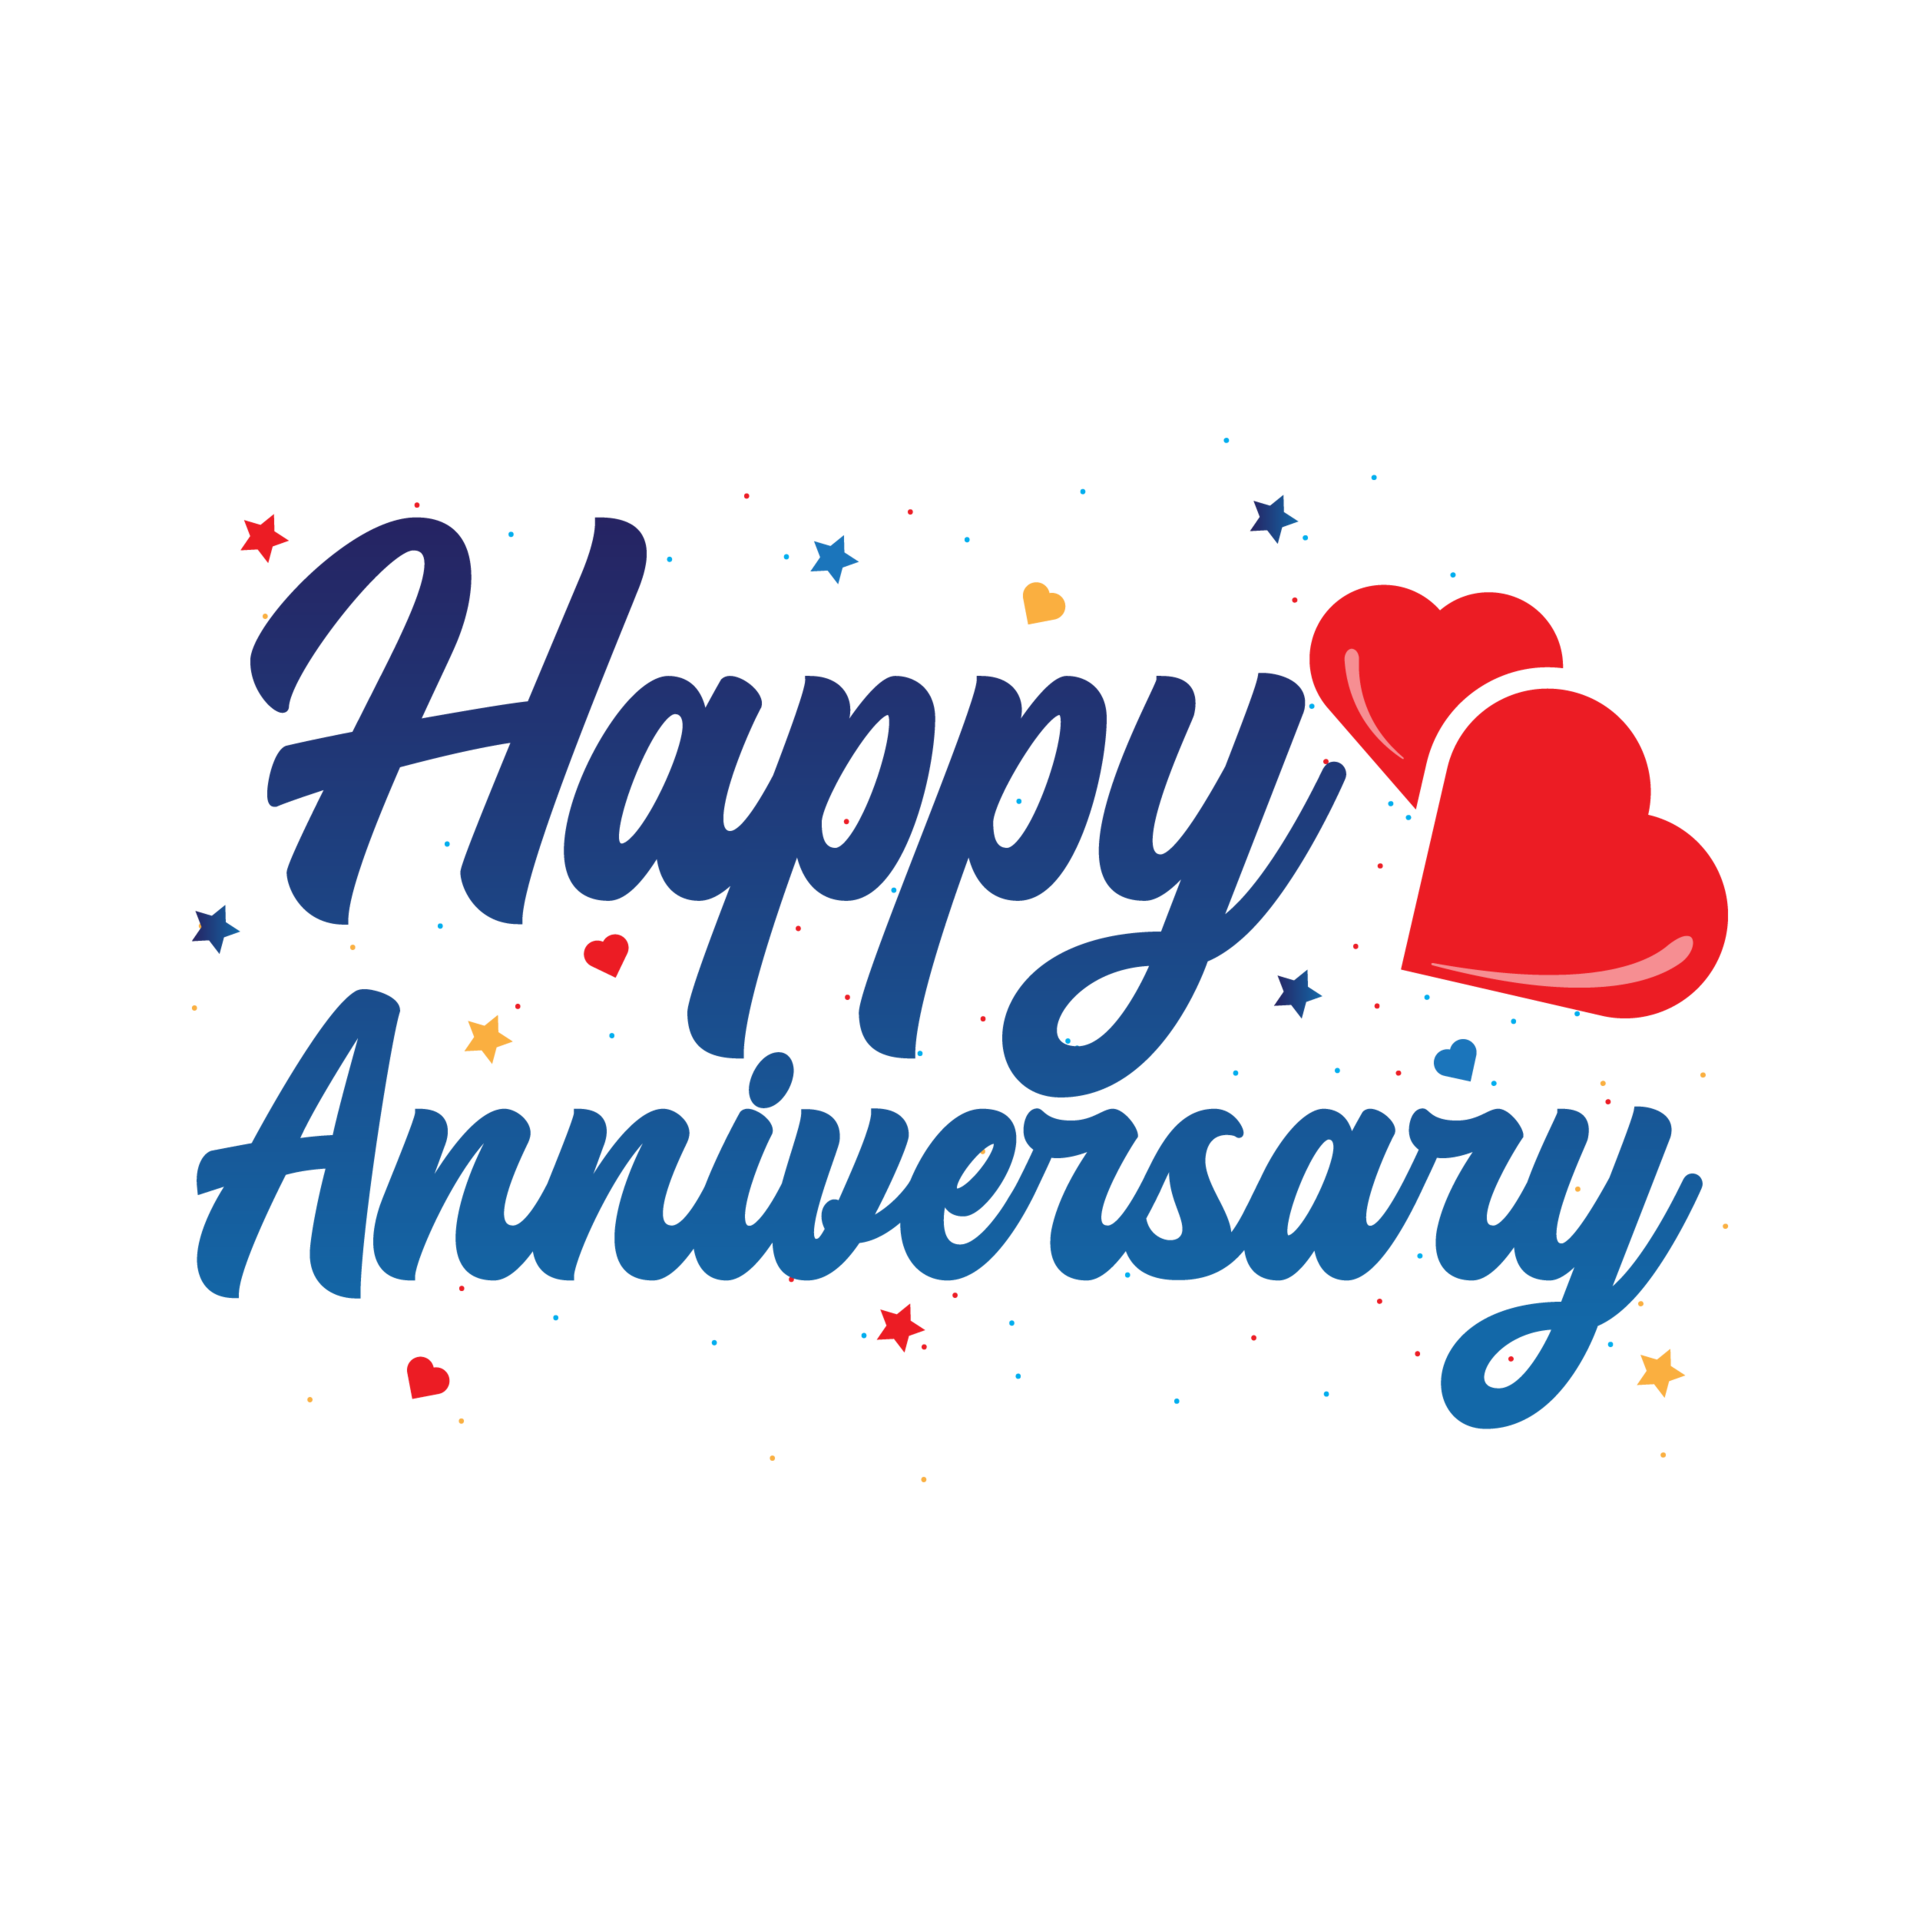 Happy Anniversary Text Pngs For Free Download